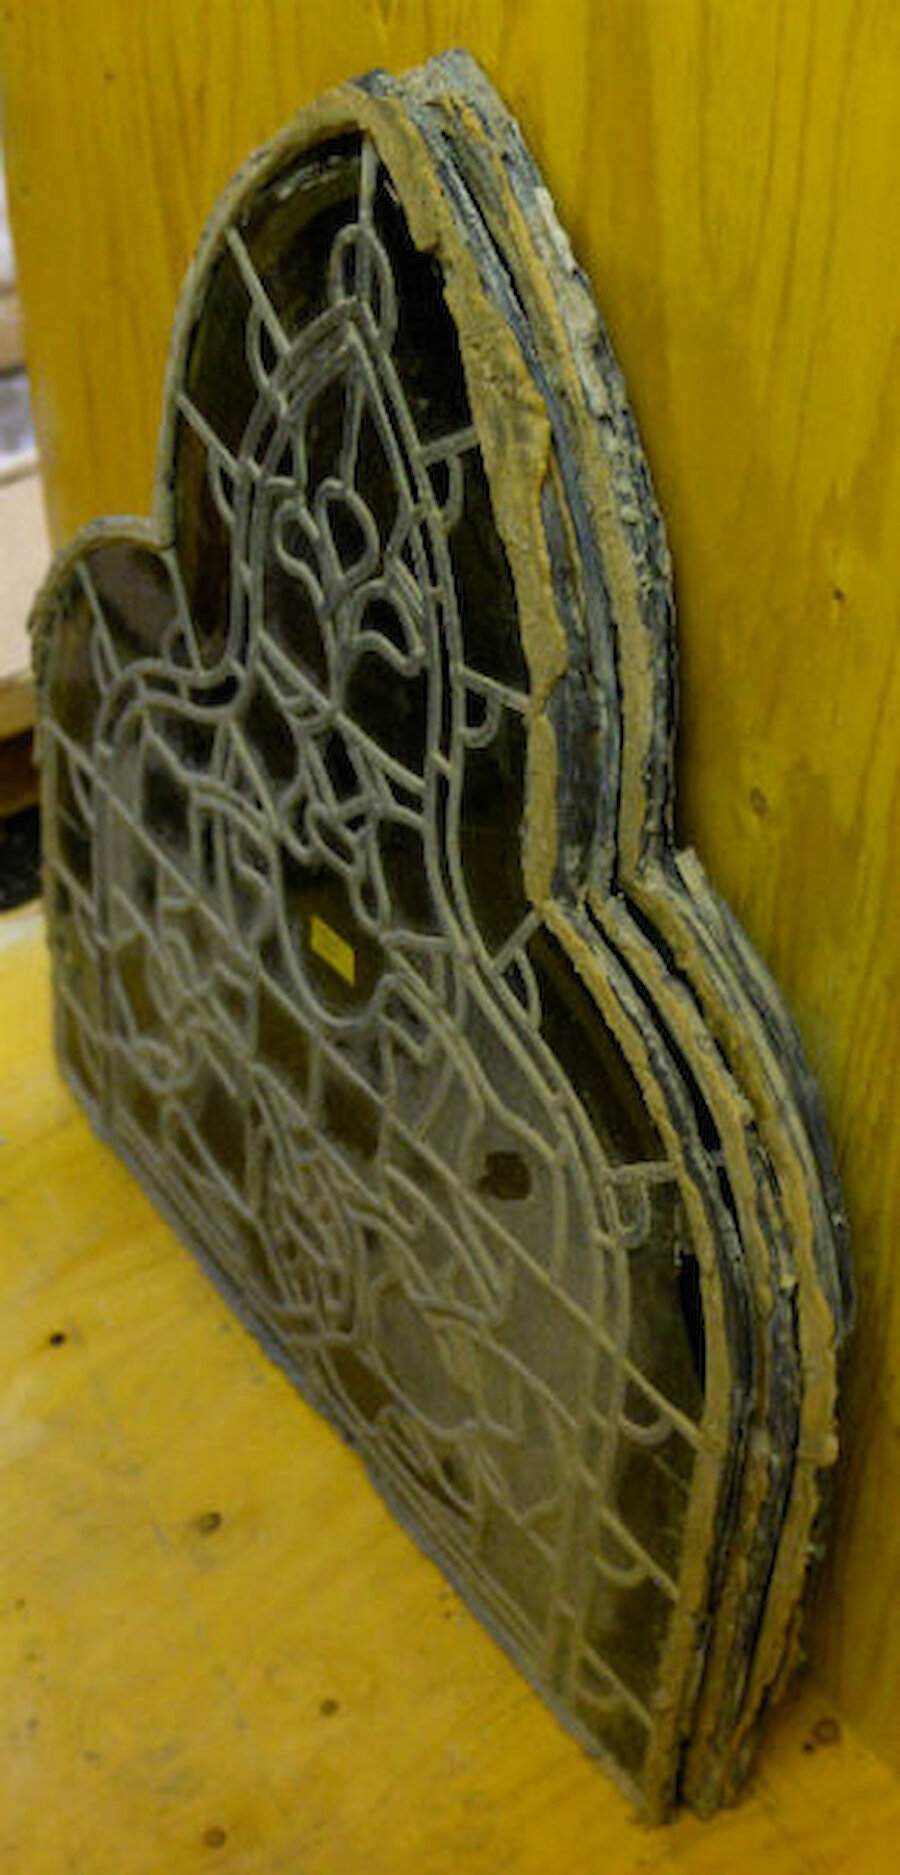 Sections of stained glass awaiting restoration. Again, the butyl rubber sealant can be seen adhering to the lead. (Courtesy Alastair Hamilton)